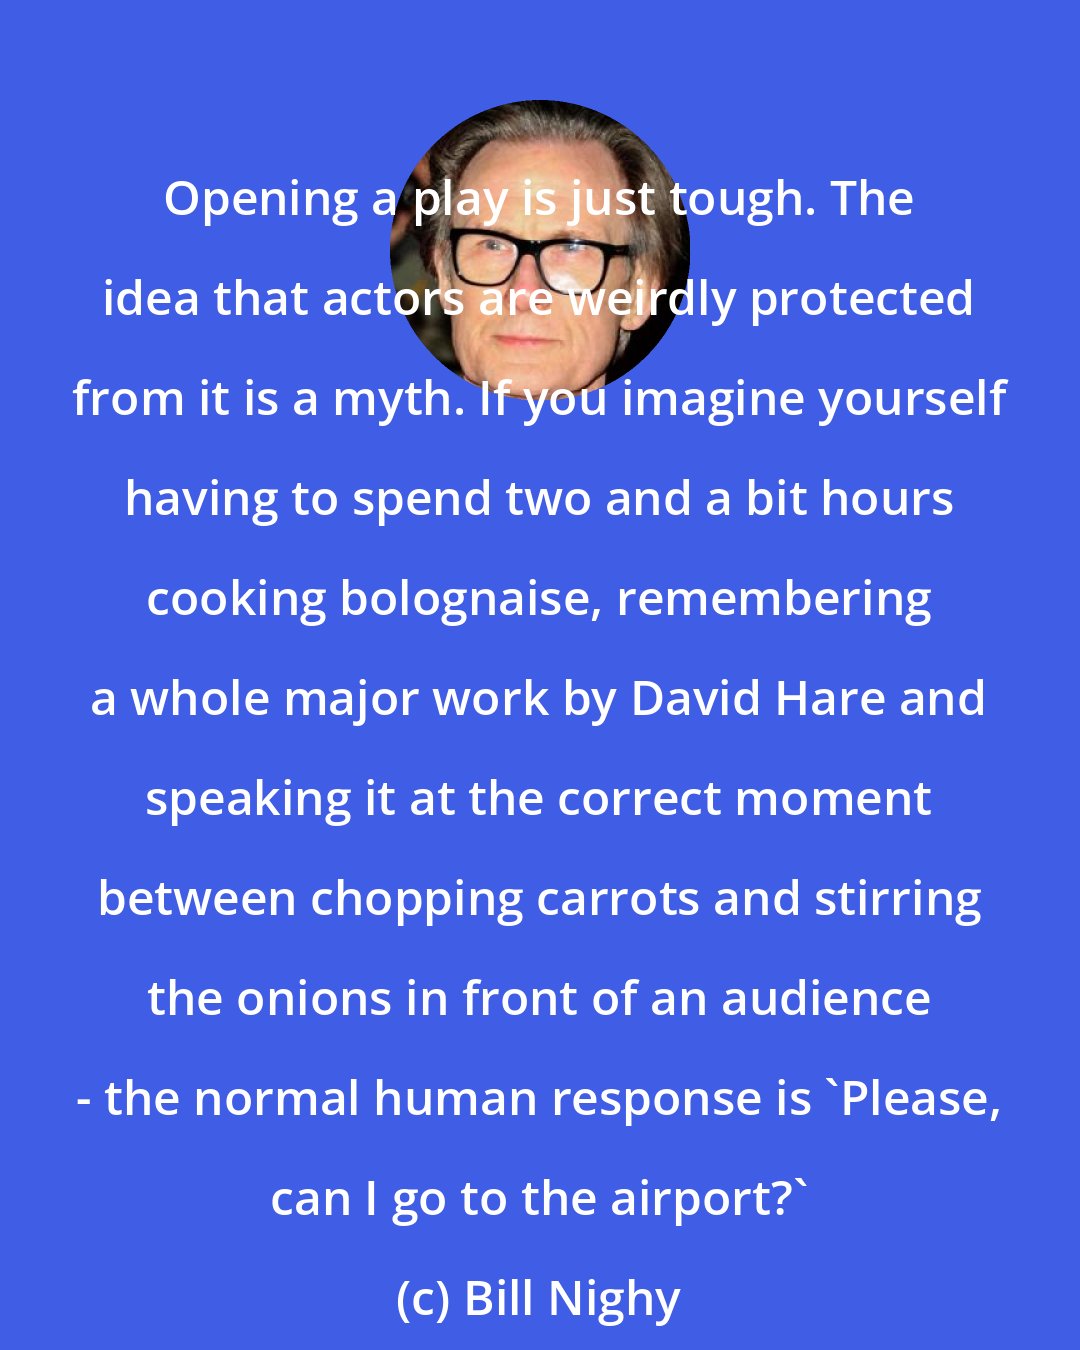 Bill Nighy: Opening a play is just tough. The idea that actors are weirdly protected from it is a myth. If you imagine yourself having to spend two and a bit hours cooking bolognaise, remembering a whole major work by David Hare and speaking it at the correct moment between chopping carrots and stirring the onions in front of an audience - the normal human response is 'Please, can I go to the airport?'